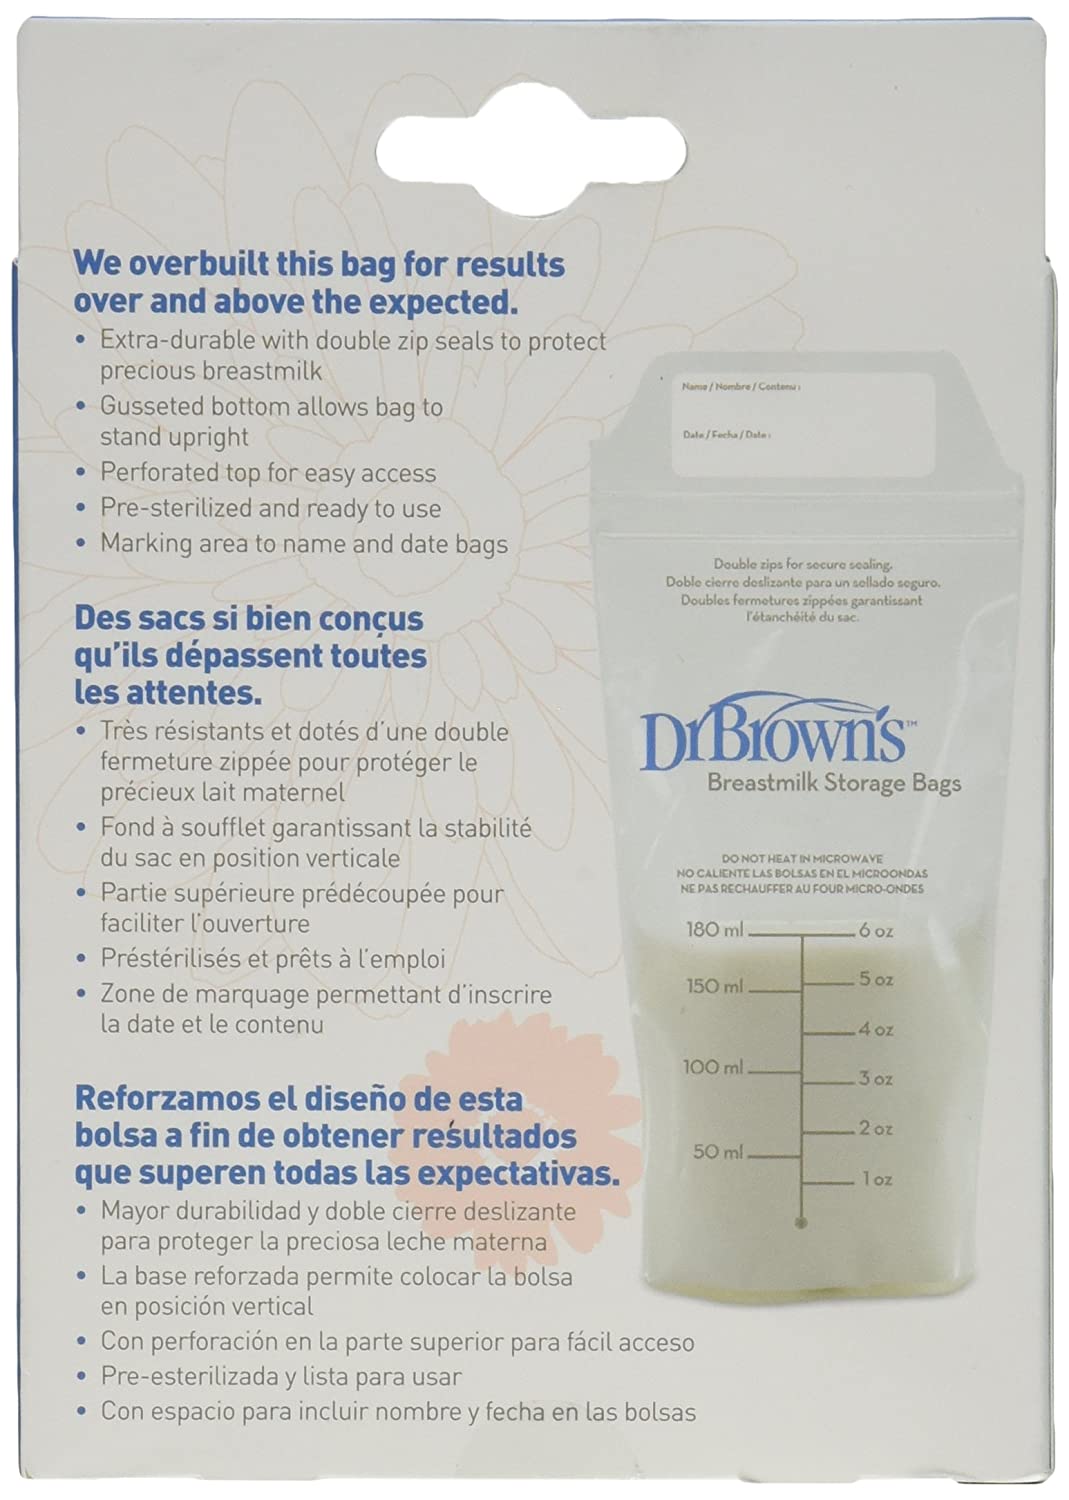 Dr. Brown's Breastmilk Storage Bag for Baby Feeding, 100 Count 6 oz